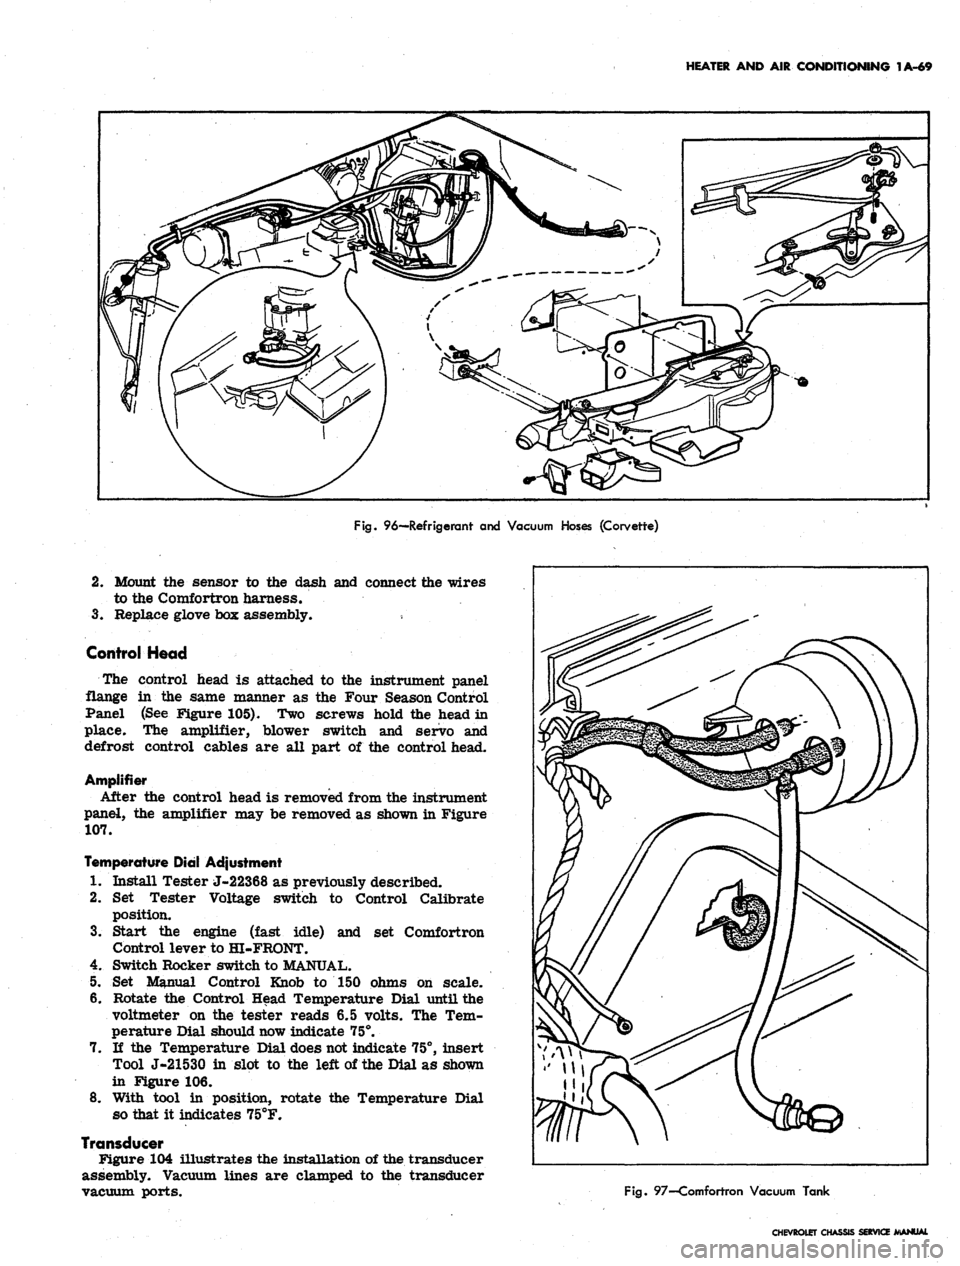 CHEVROLET CAMARO 1967 1.G Chassis Service Manual 
HEATER AND AIR CONDITIONING 1A-69

Fig.
 96—Refrigerant and Vacuum Hoses (Corvette)

2.
 Mount the sensor to the dash and connect the wires

to the Comfortron harness.

3.
 Replace glove box assemb